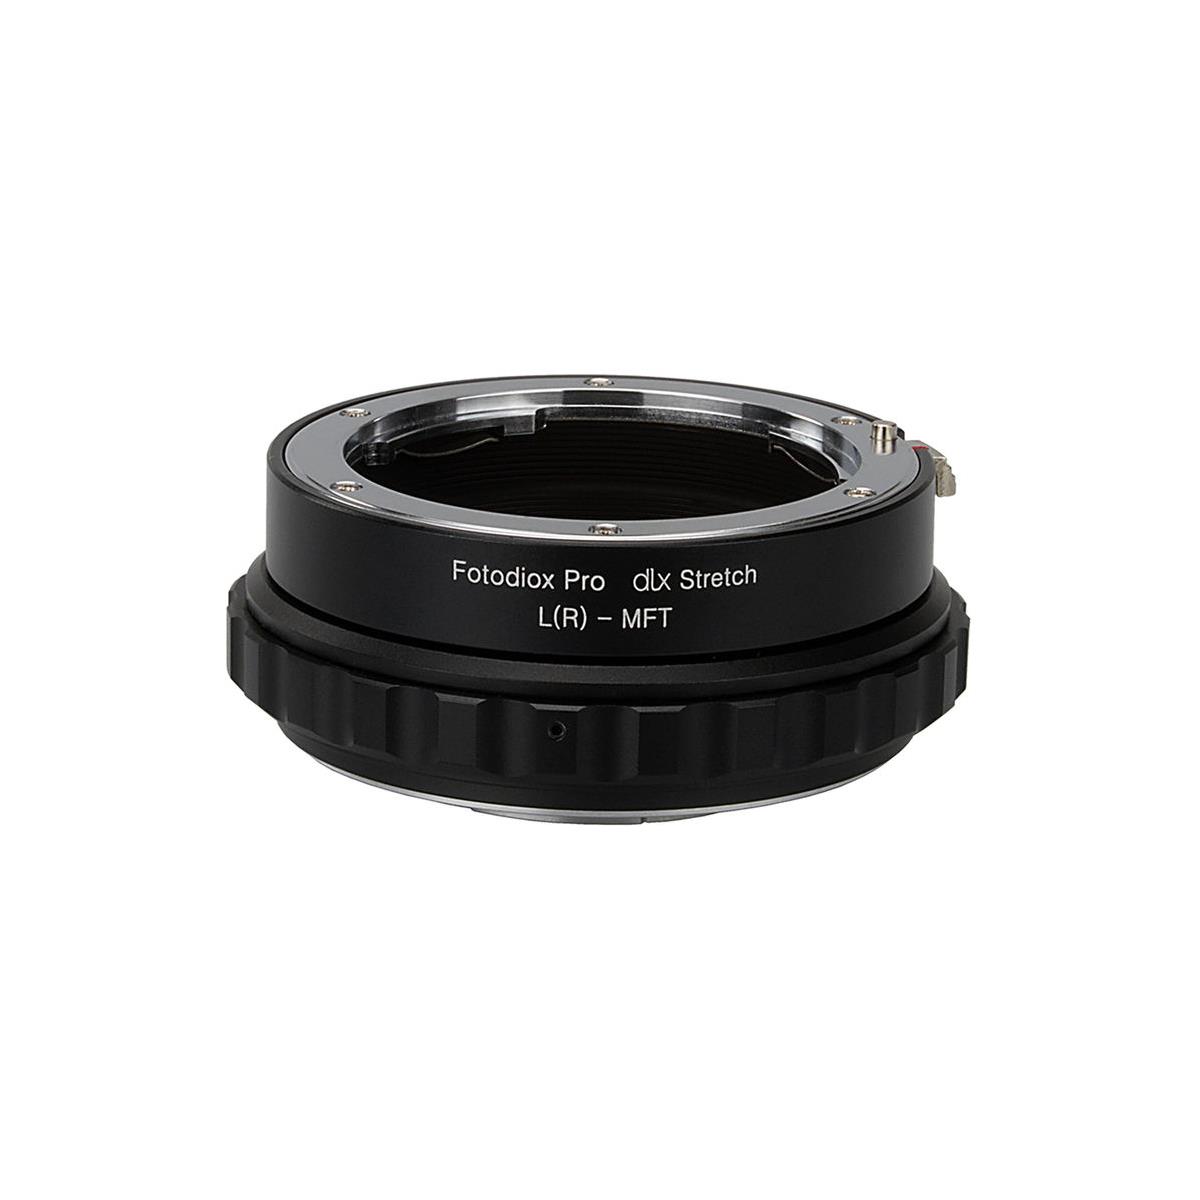 Image of Fotodiox DLX Stretch Lens Mount Adapter for Leica R SLR Lens to MFT